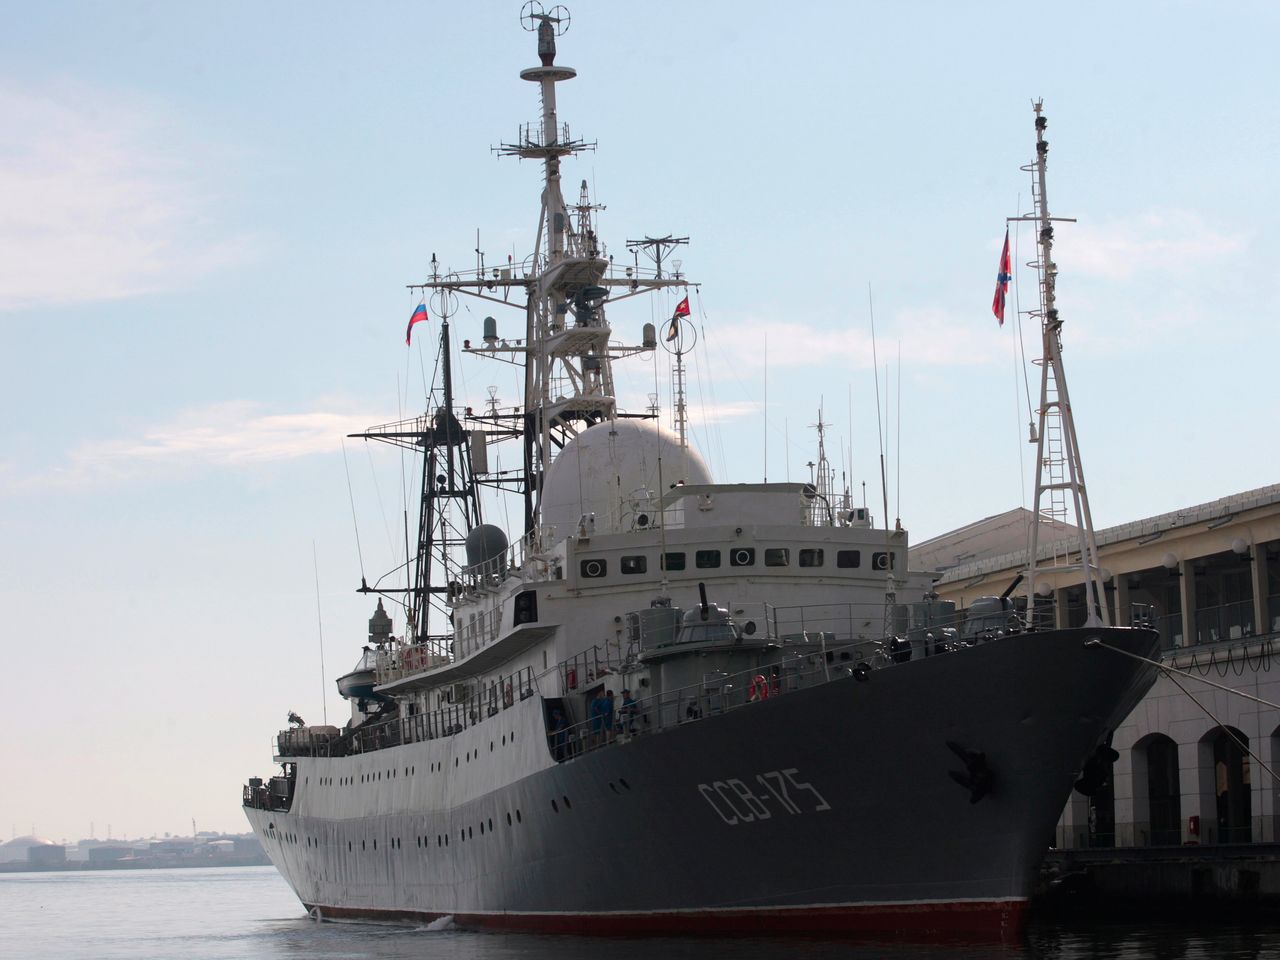 russian-spy-ship-built-for-eavesdropping-spotted-30-miles-from-a-us-submarine-base